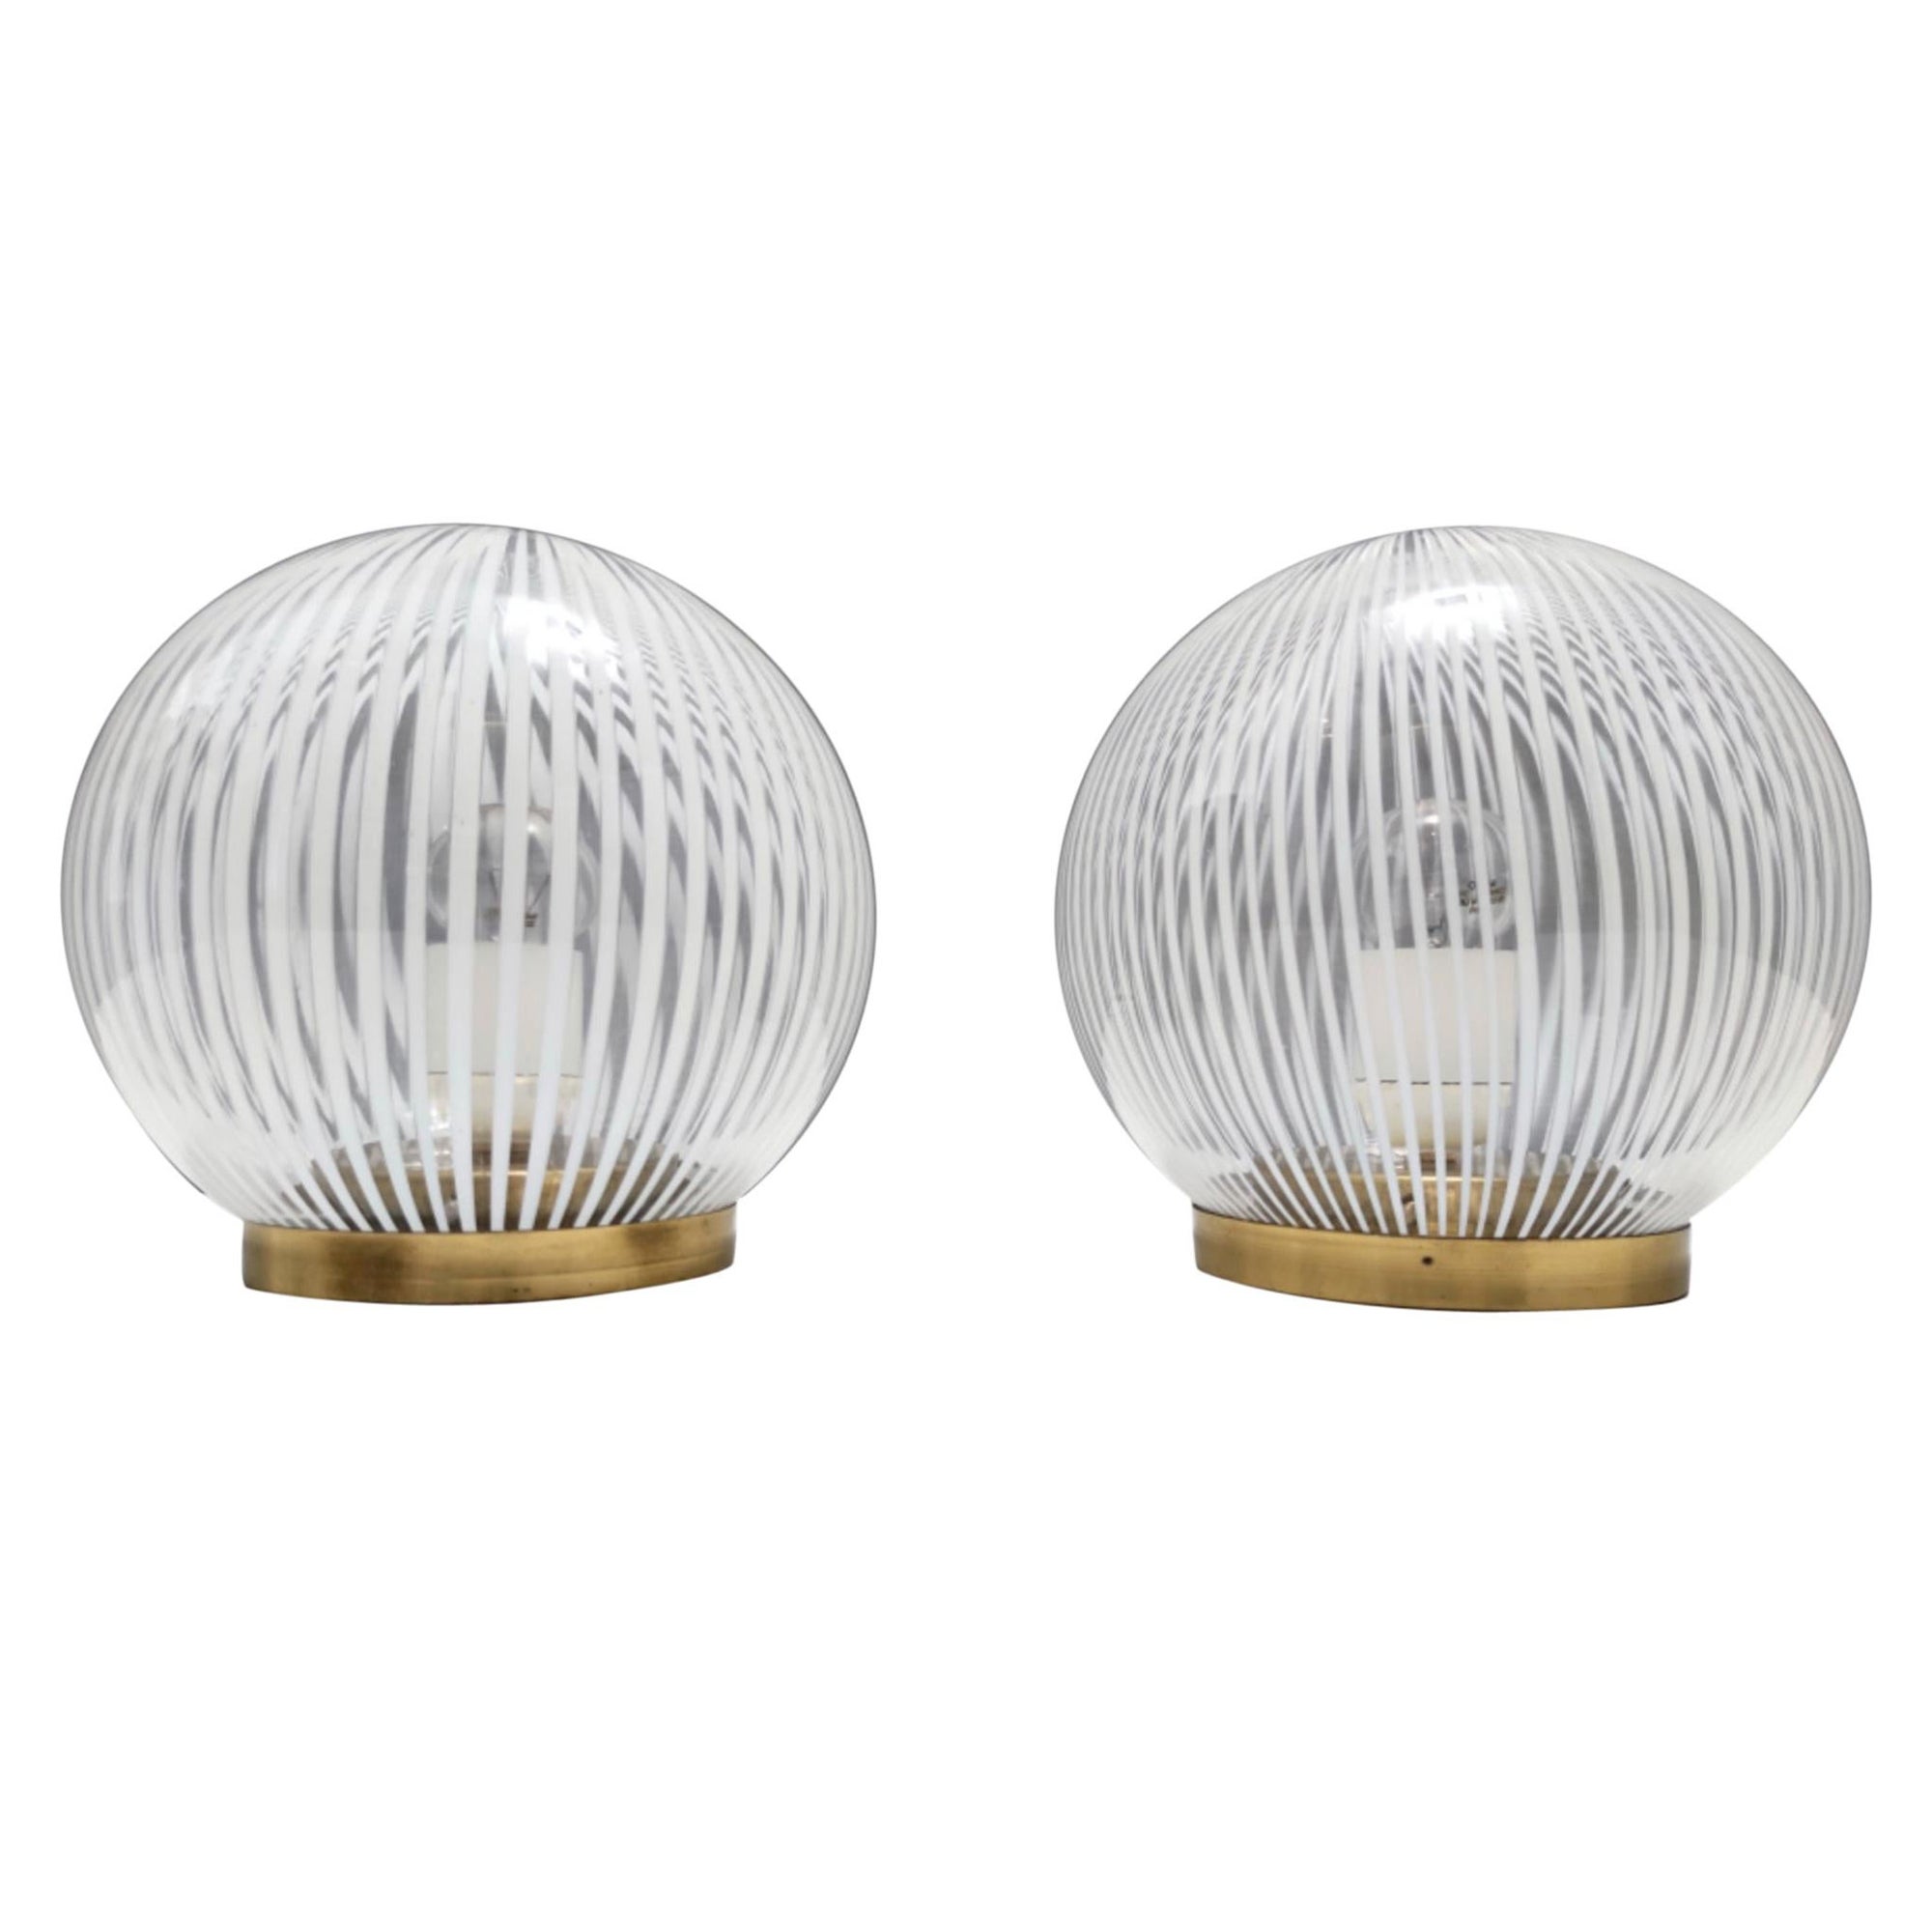 Pair of Vintage Spheric Murano Glass and Brass Table Lamps by Venini, Italy